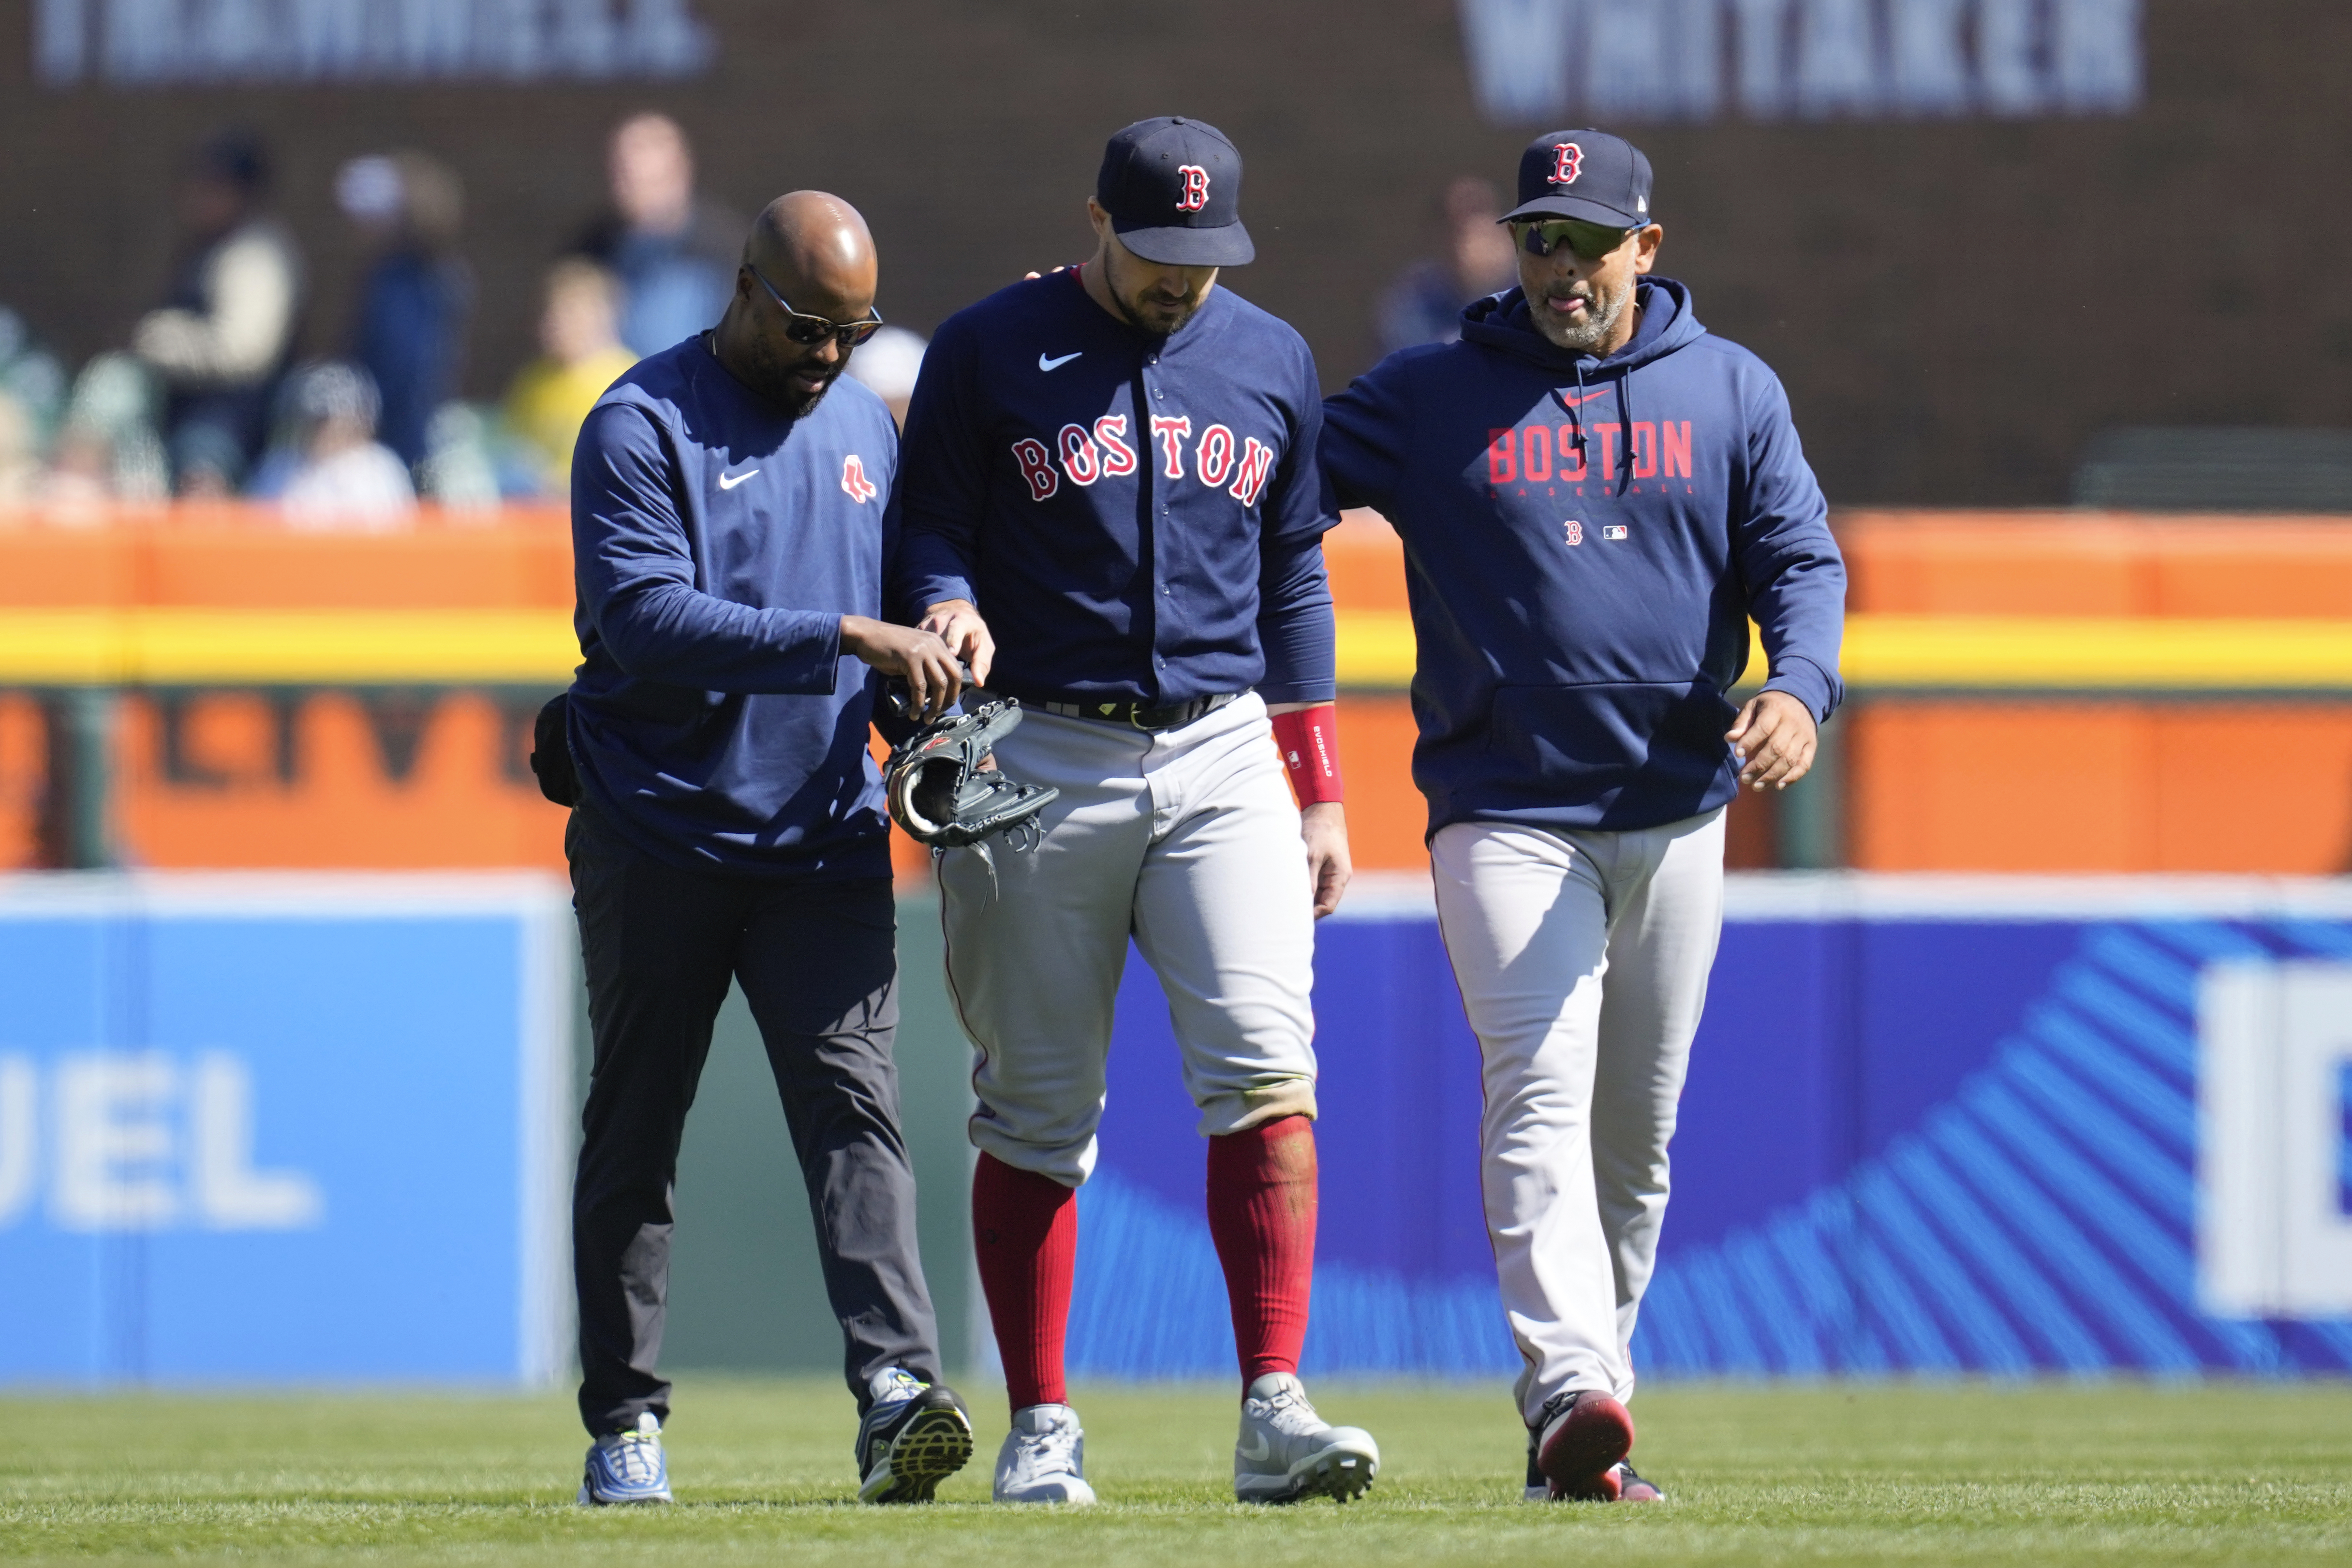 Adam Duvall injury update: Red Sox OF fractured wrist, out